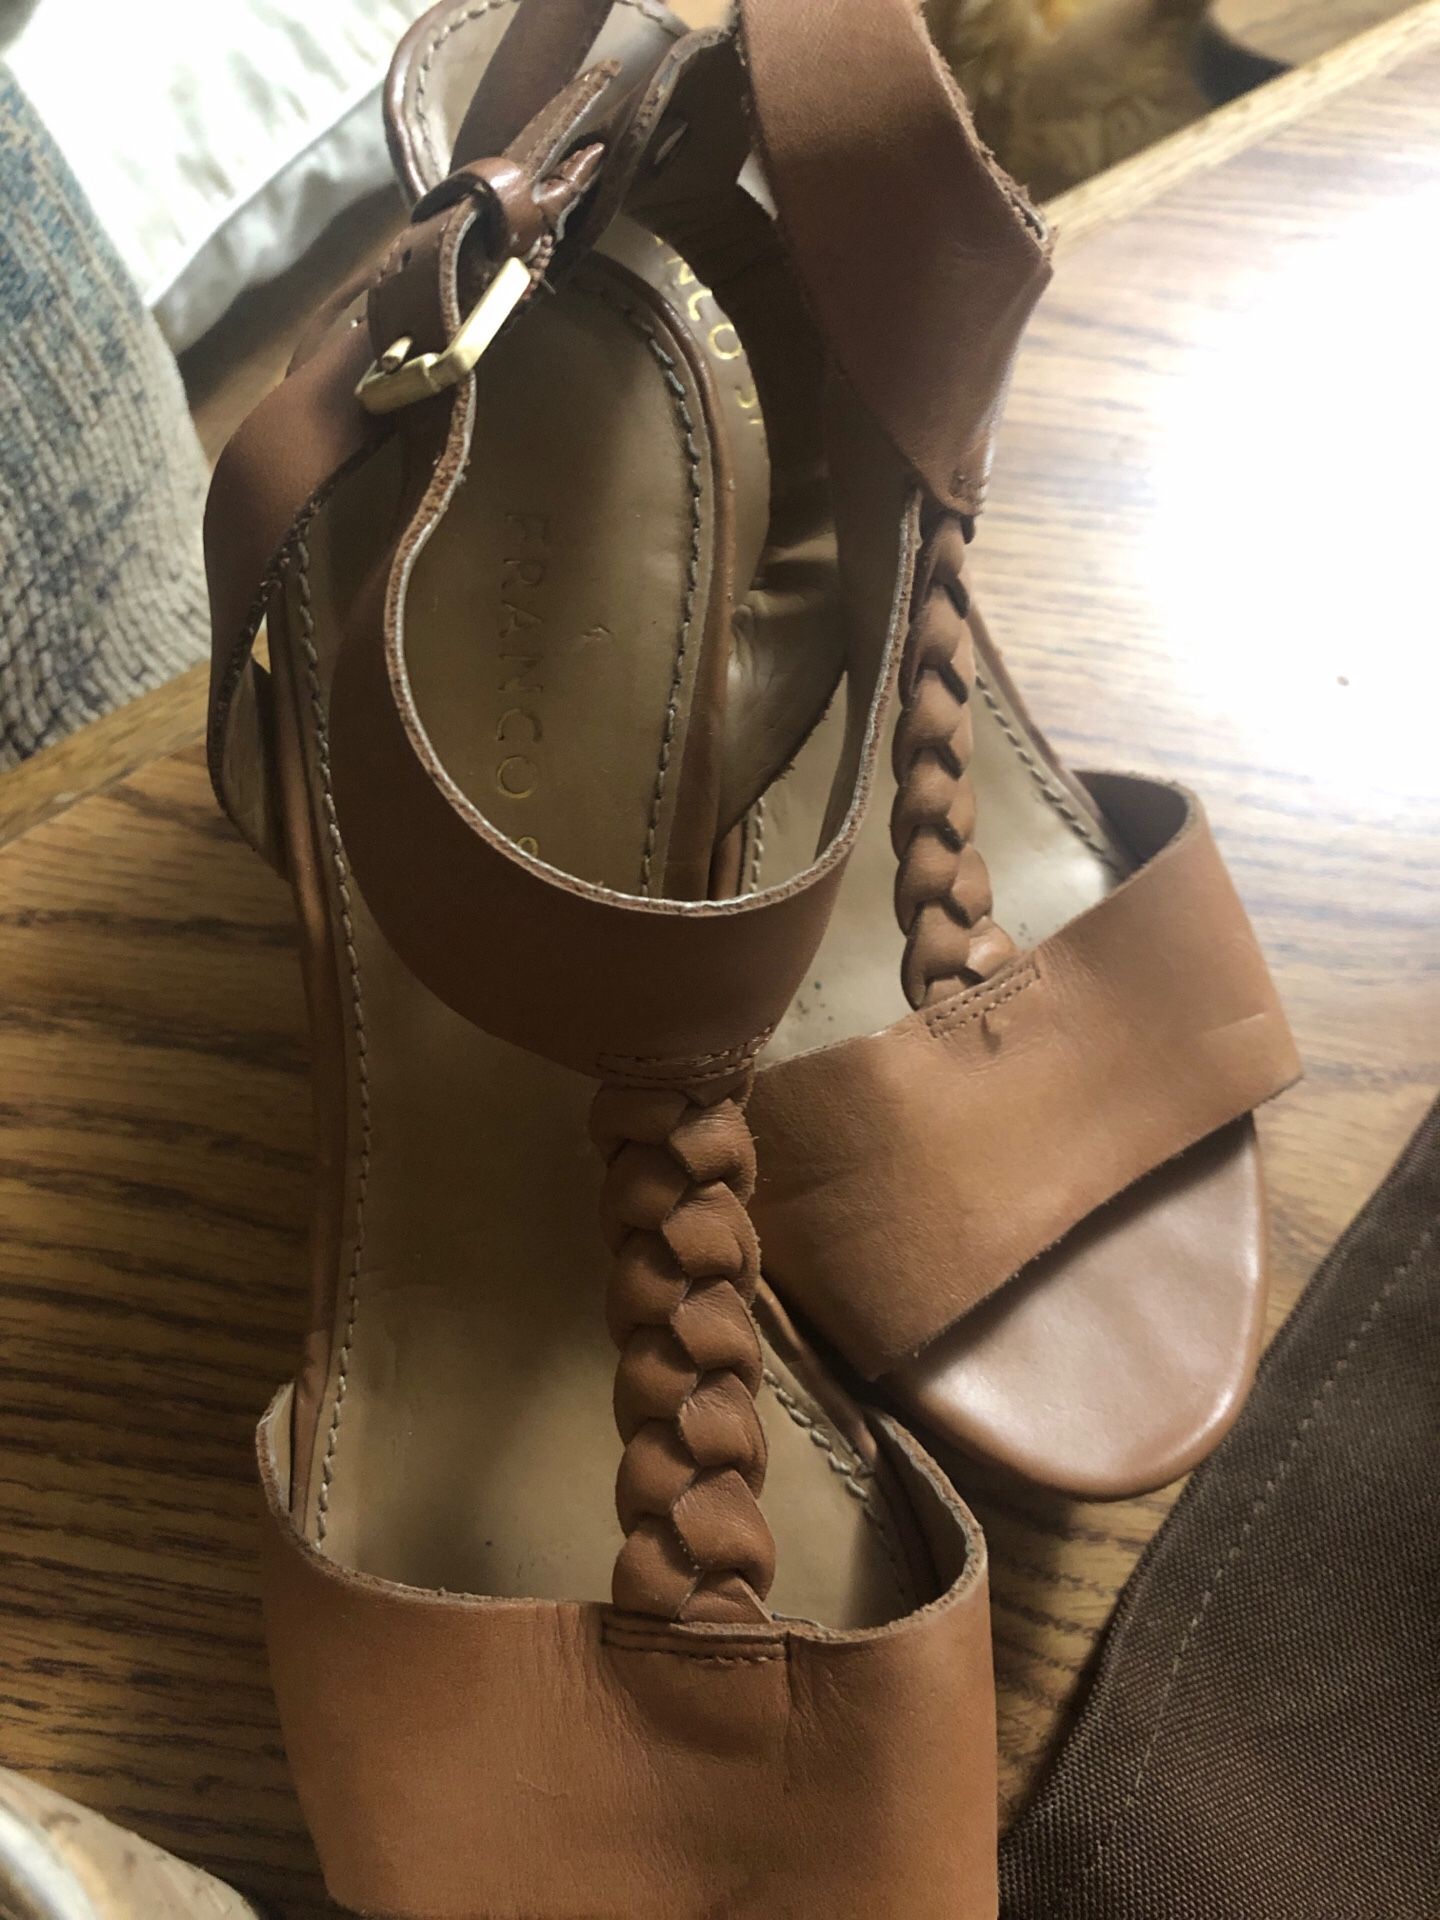 Here another pair of sandals wedge heel size 7 tan light weight